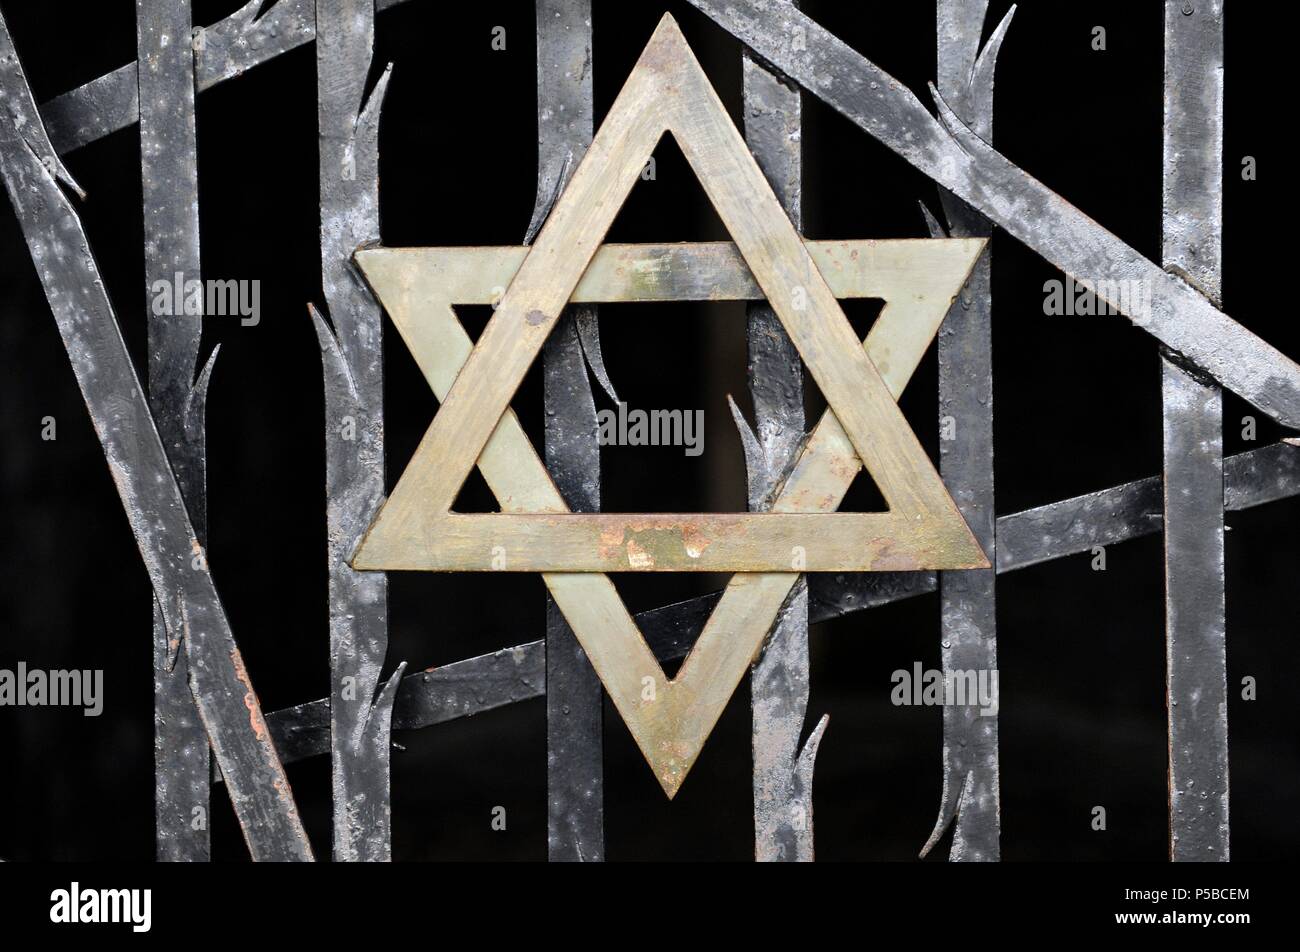 Dachau Concentration Camp. Nazi camp of prisoners opened in 1933. Jewish Memorial, 1967. Detail of the Star of David. Germany. Stock Photo